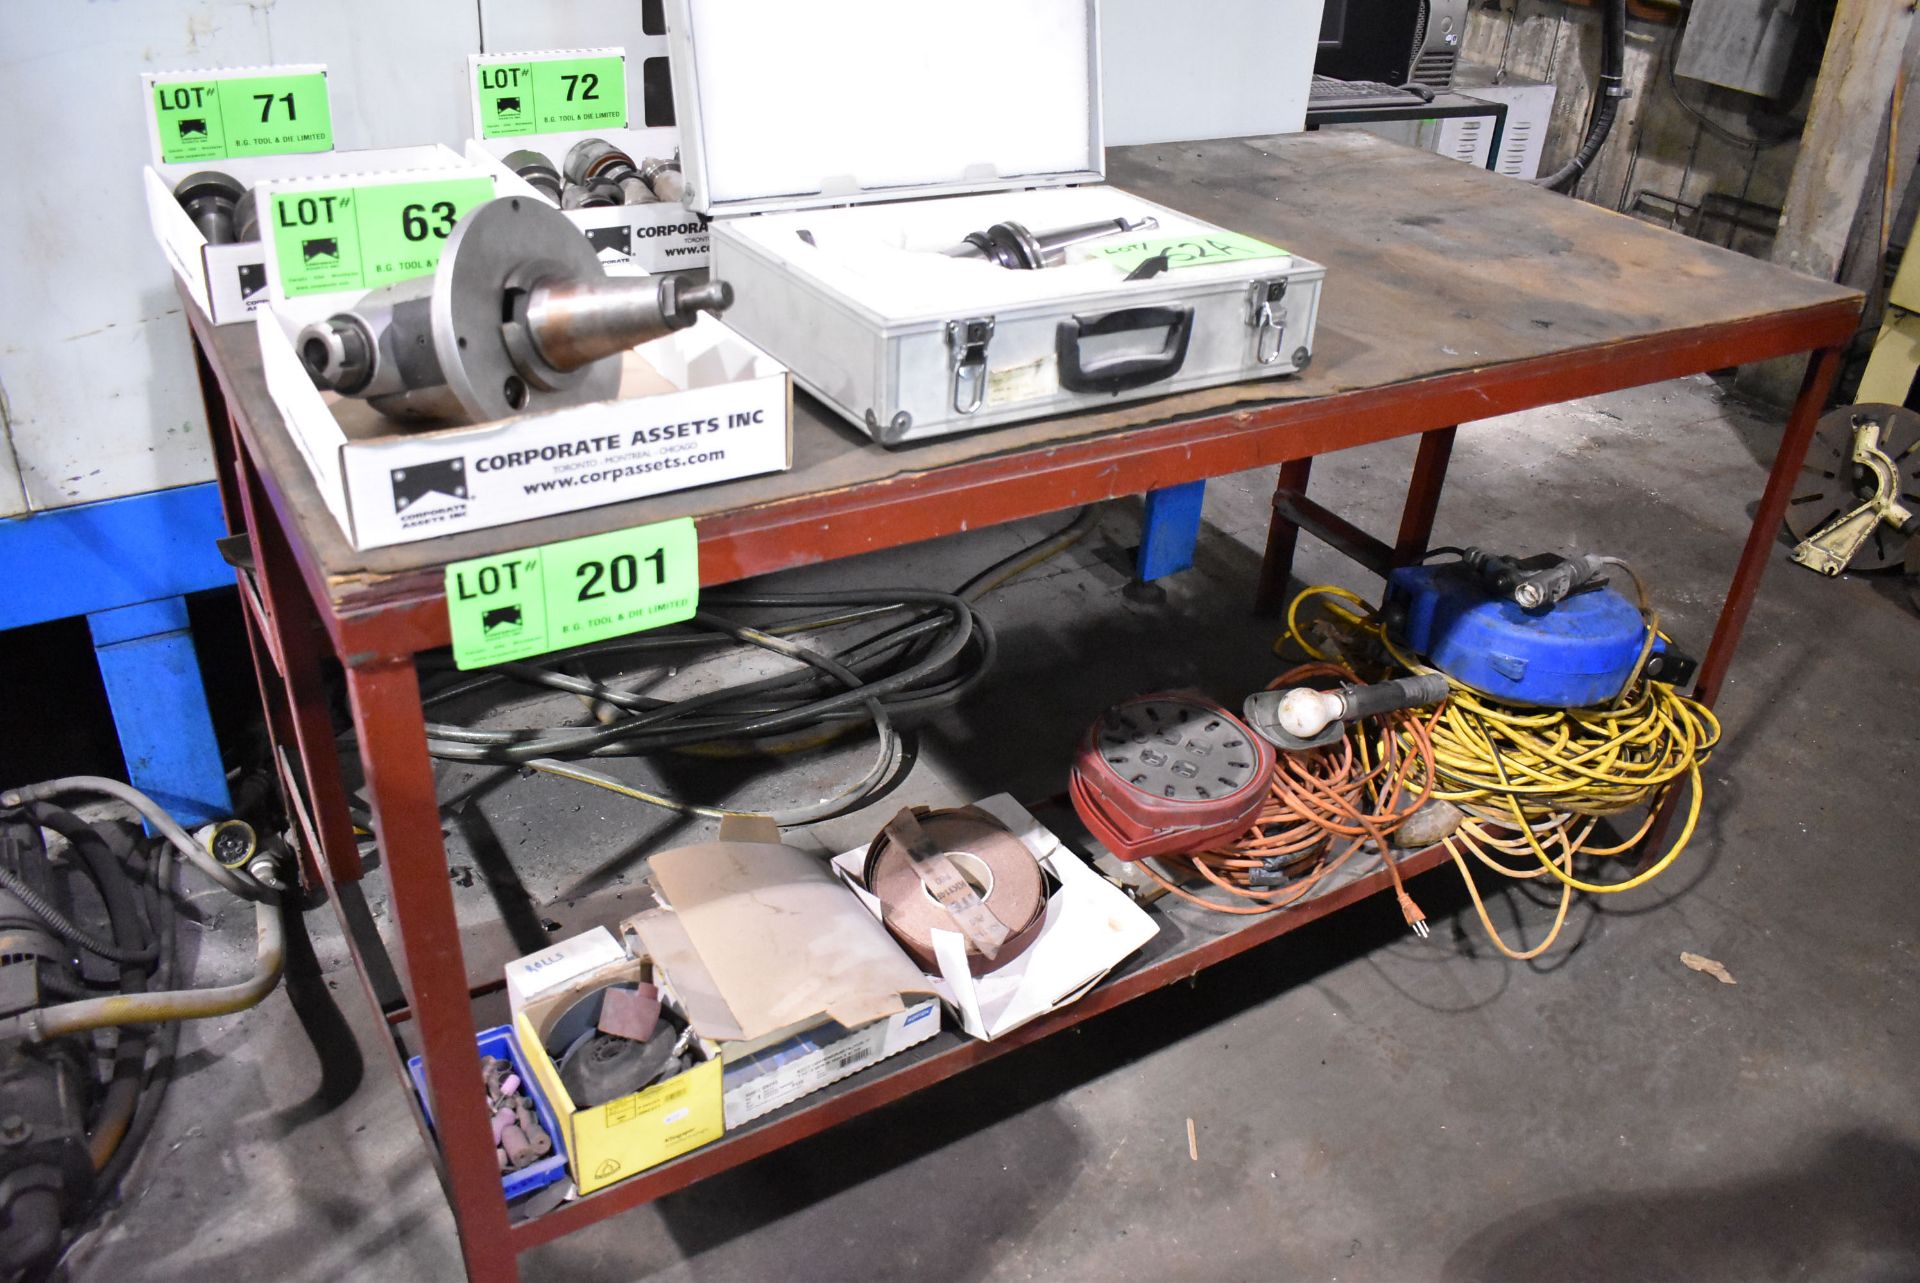 LOT/ WORK BENCH WITH REMAINING CONTENTS - INCLUDING EXTENSION CORDS, SANDING ACCESSORIES